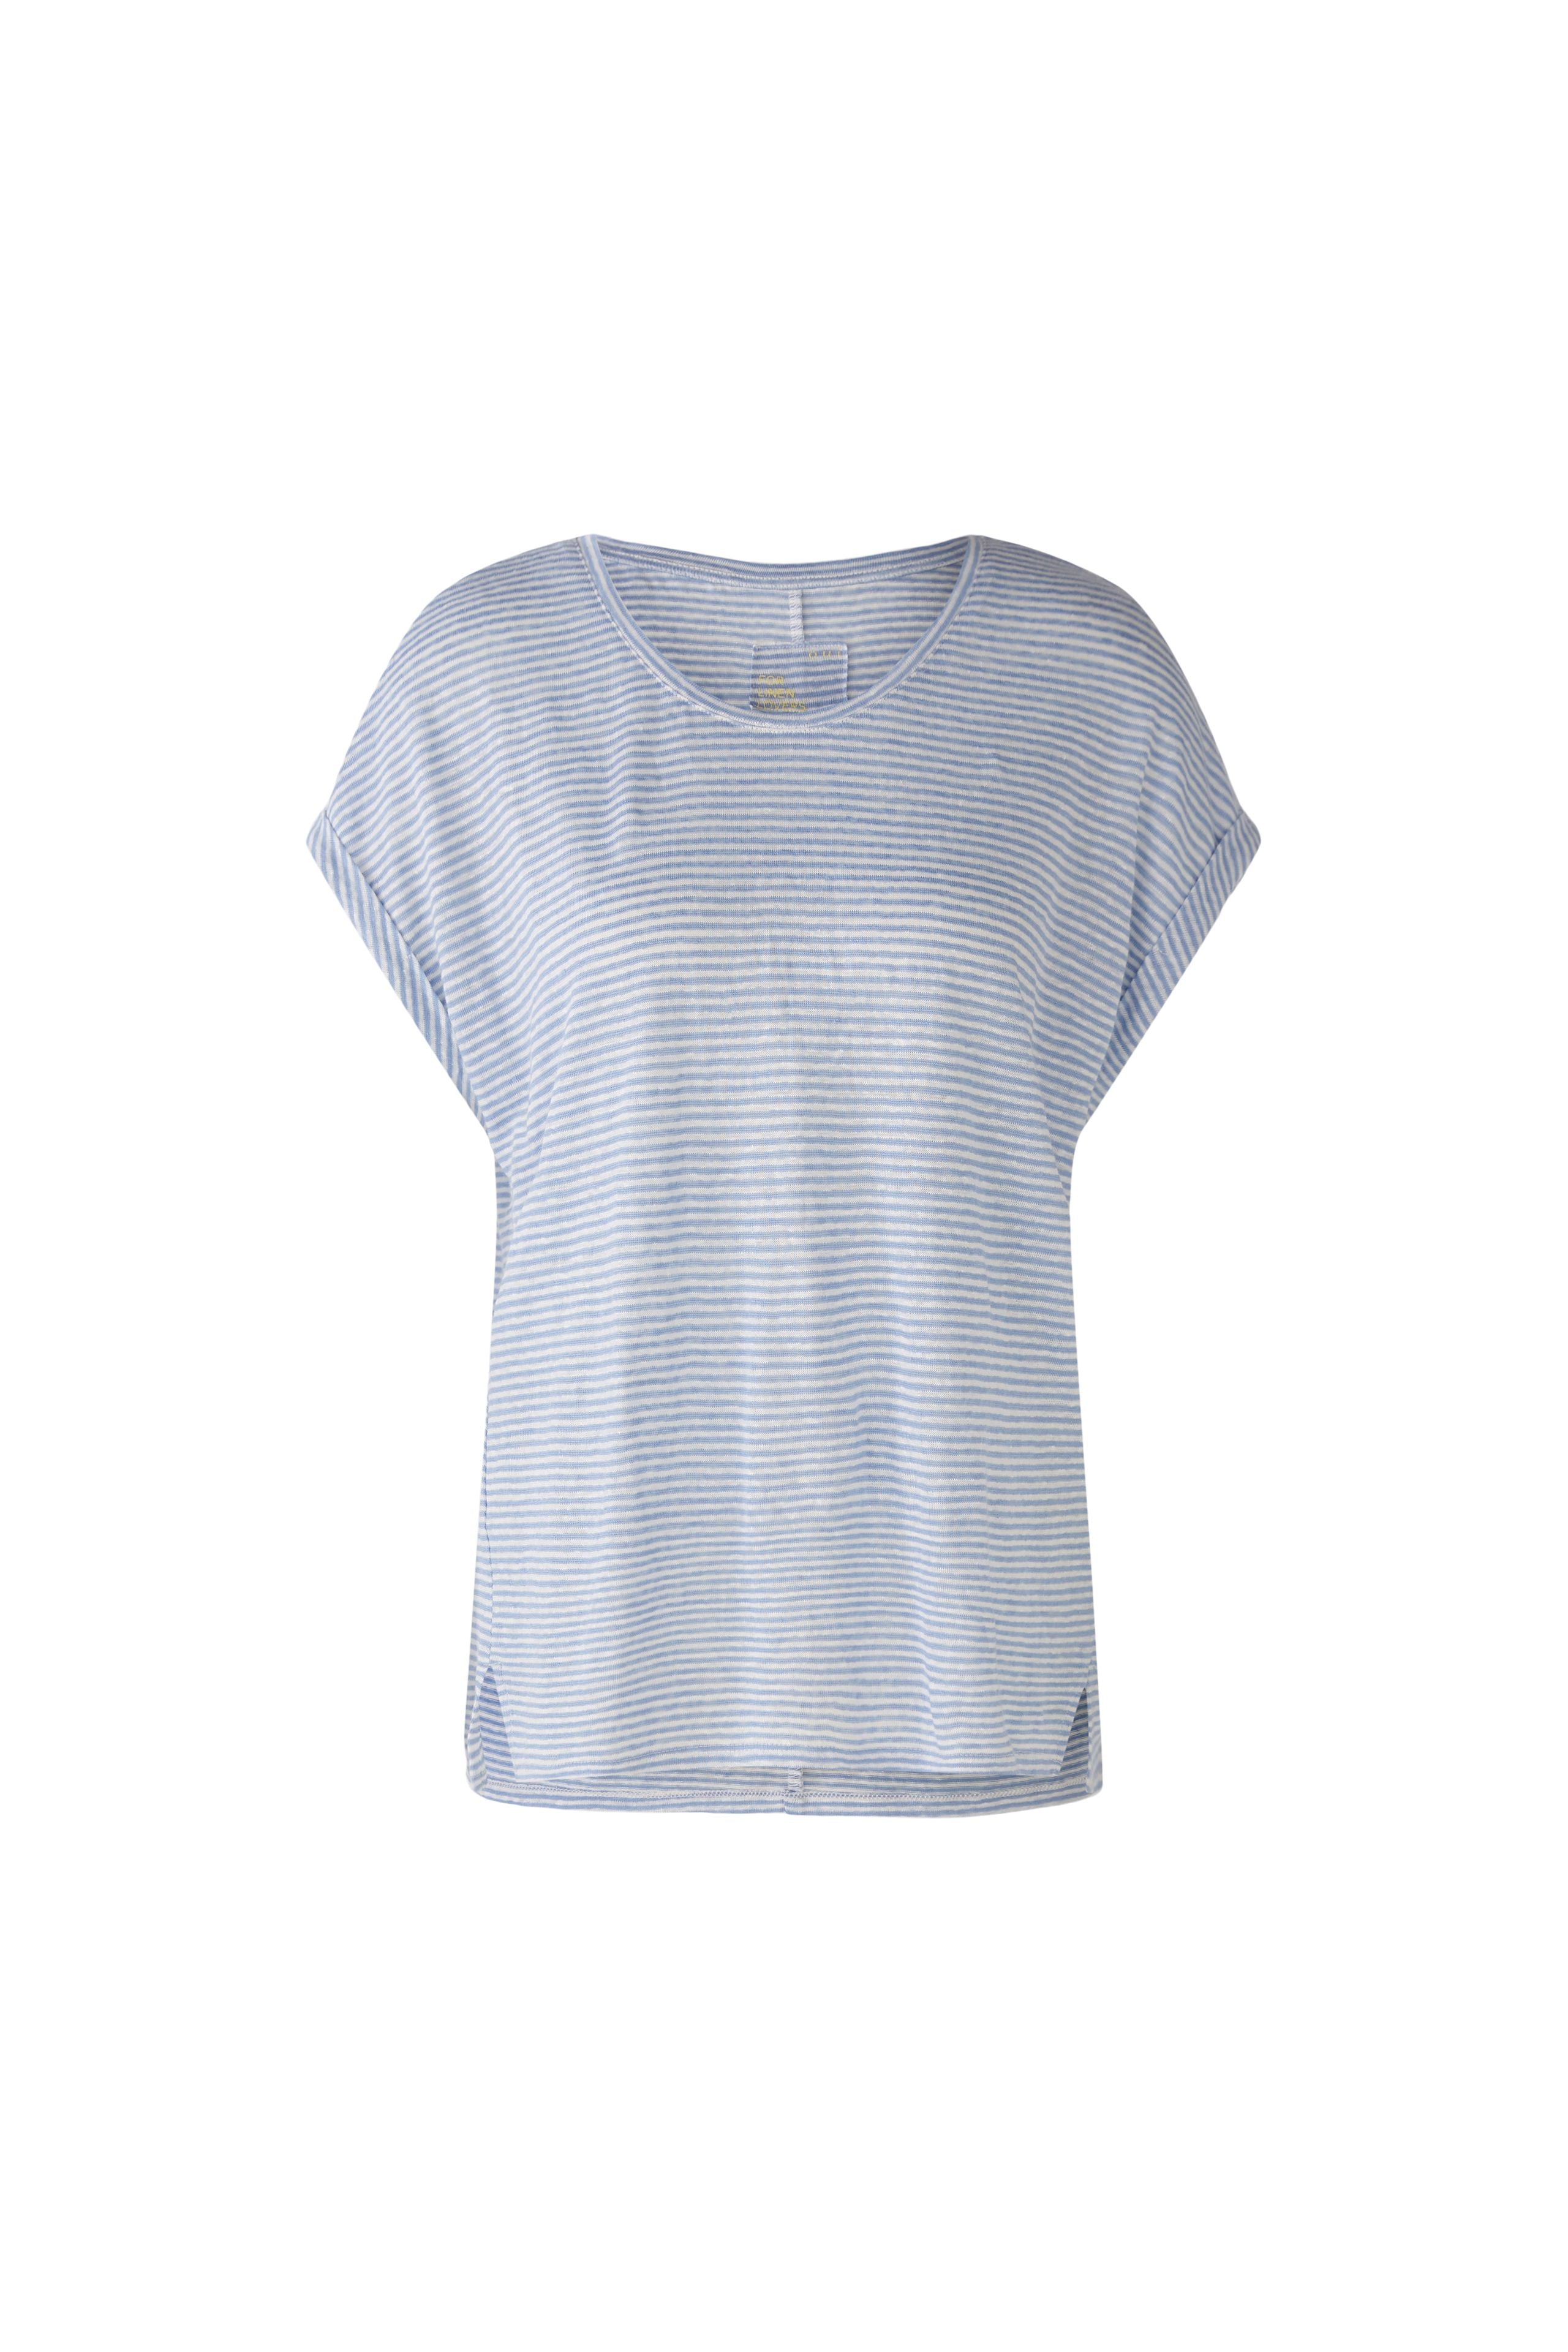 Casual Cut T-Shirt in Off White/Blue